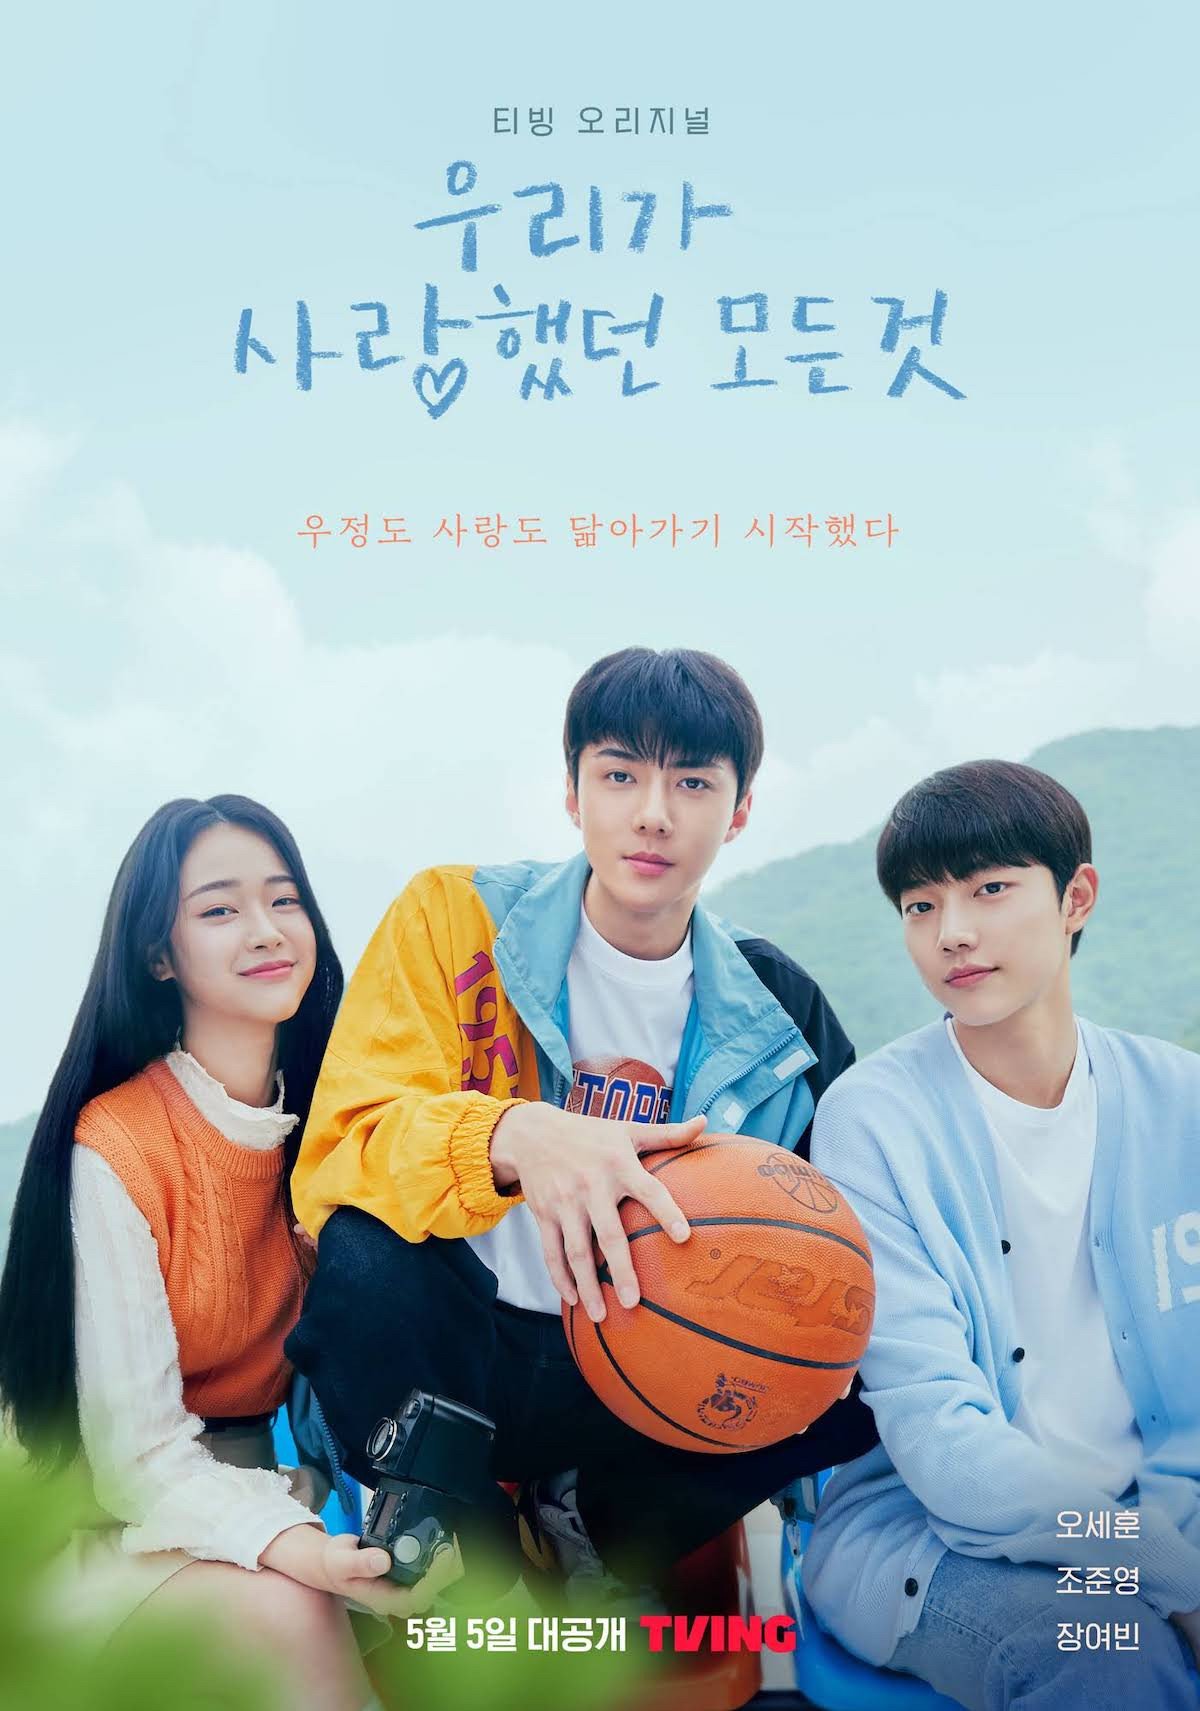 Oh Se-hun (centre), of K-pop boy band EXO, in a poster for the Korean drama series “All That We Loved”. Photo: courtesy of Tving